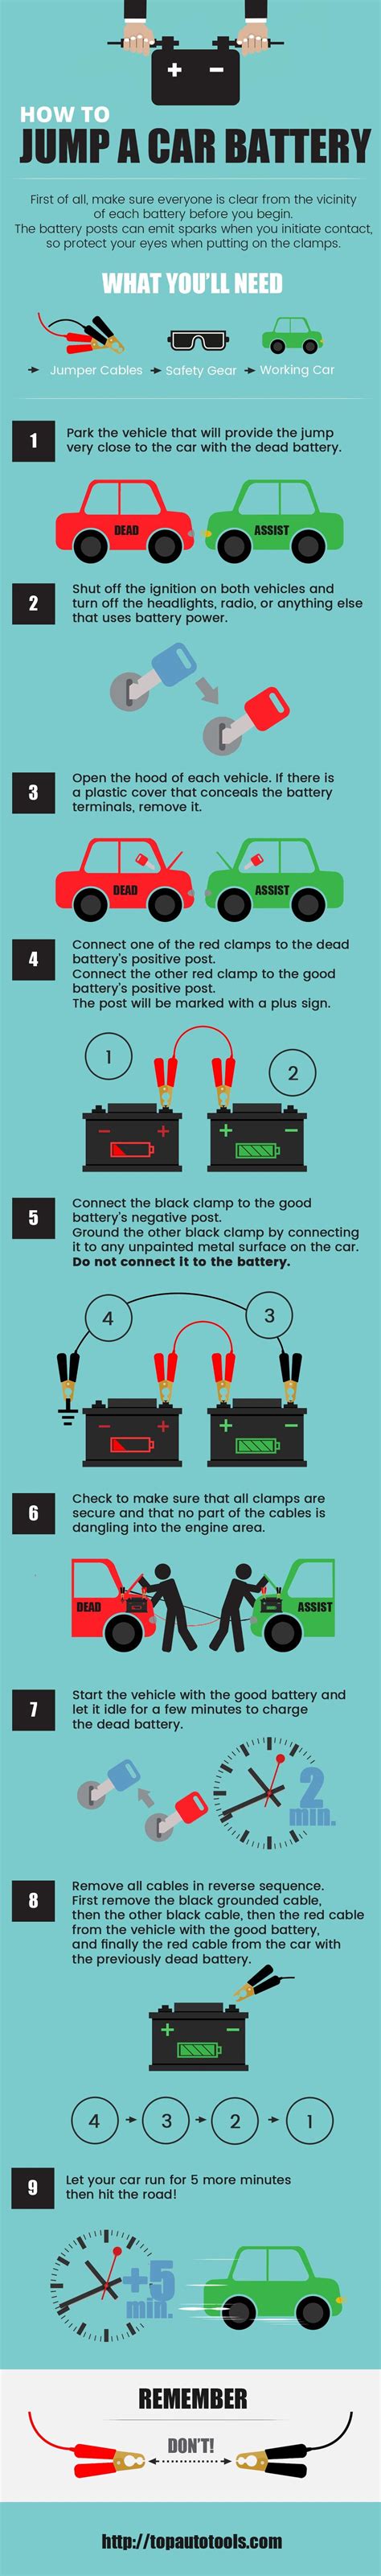 Now you are ready to turn the key of the car with the dead battery and. Simple Steps to Starting a Car with Jumper Cables